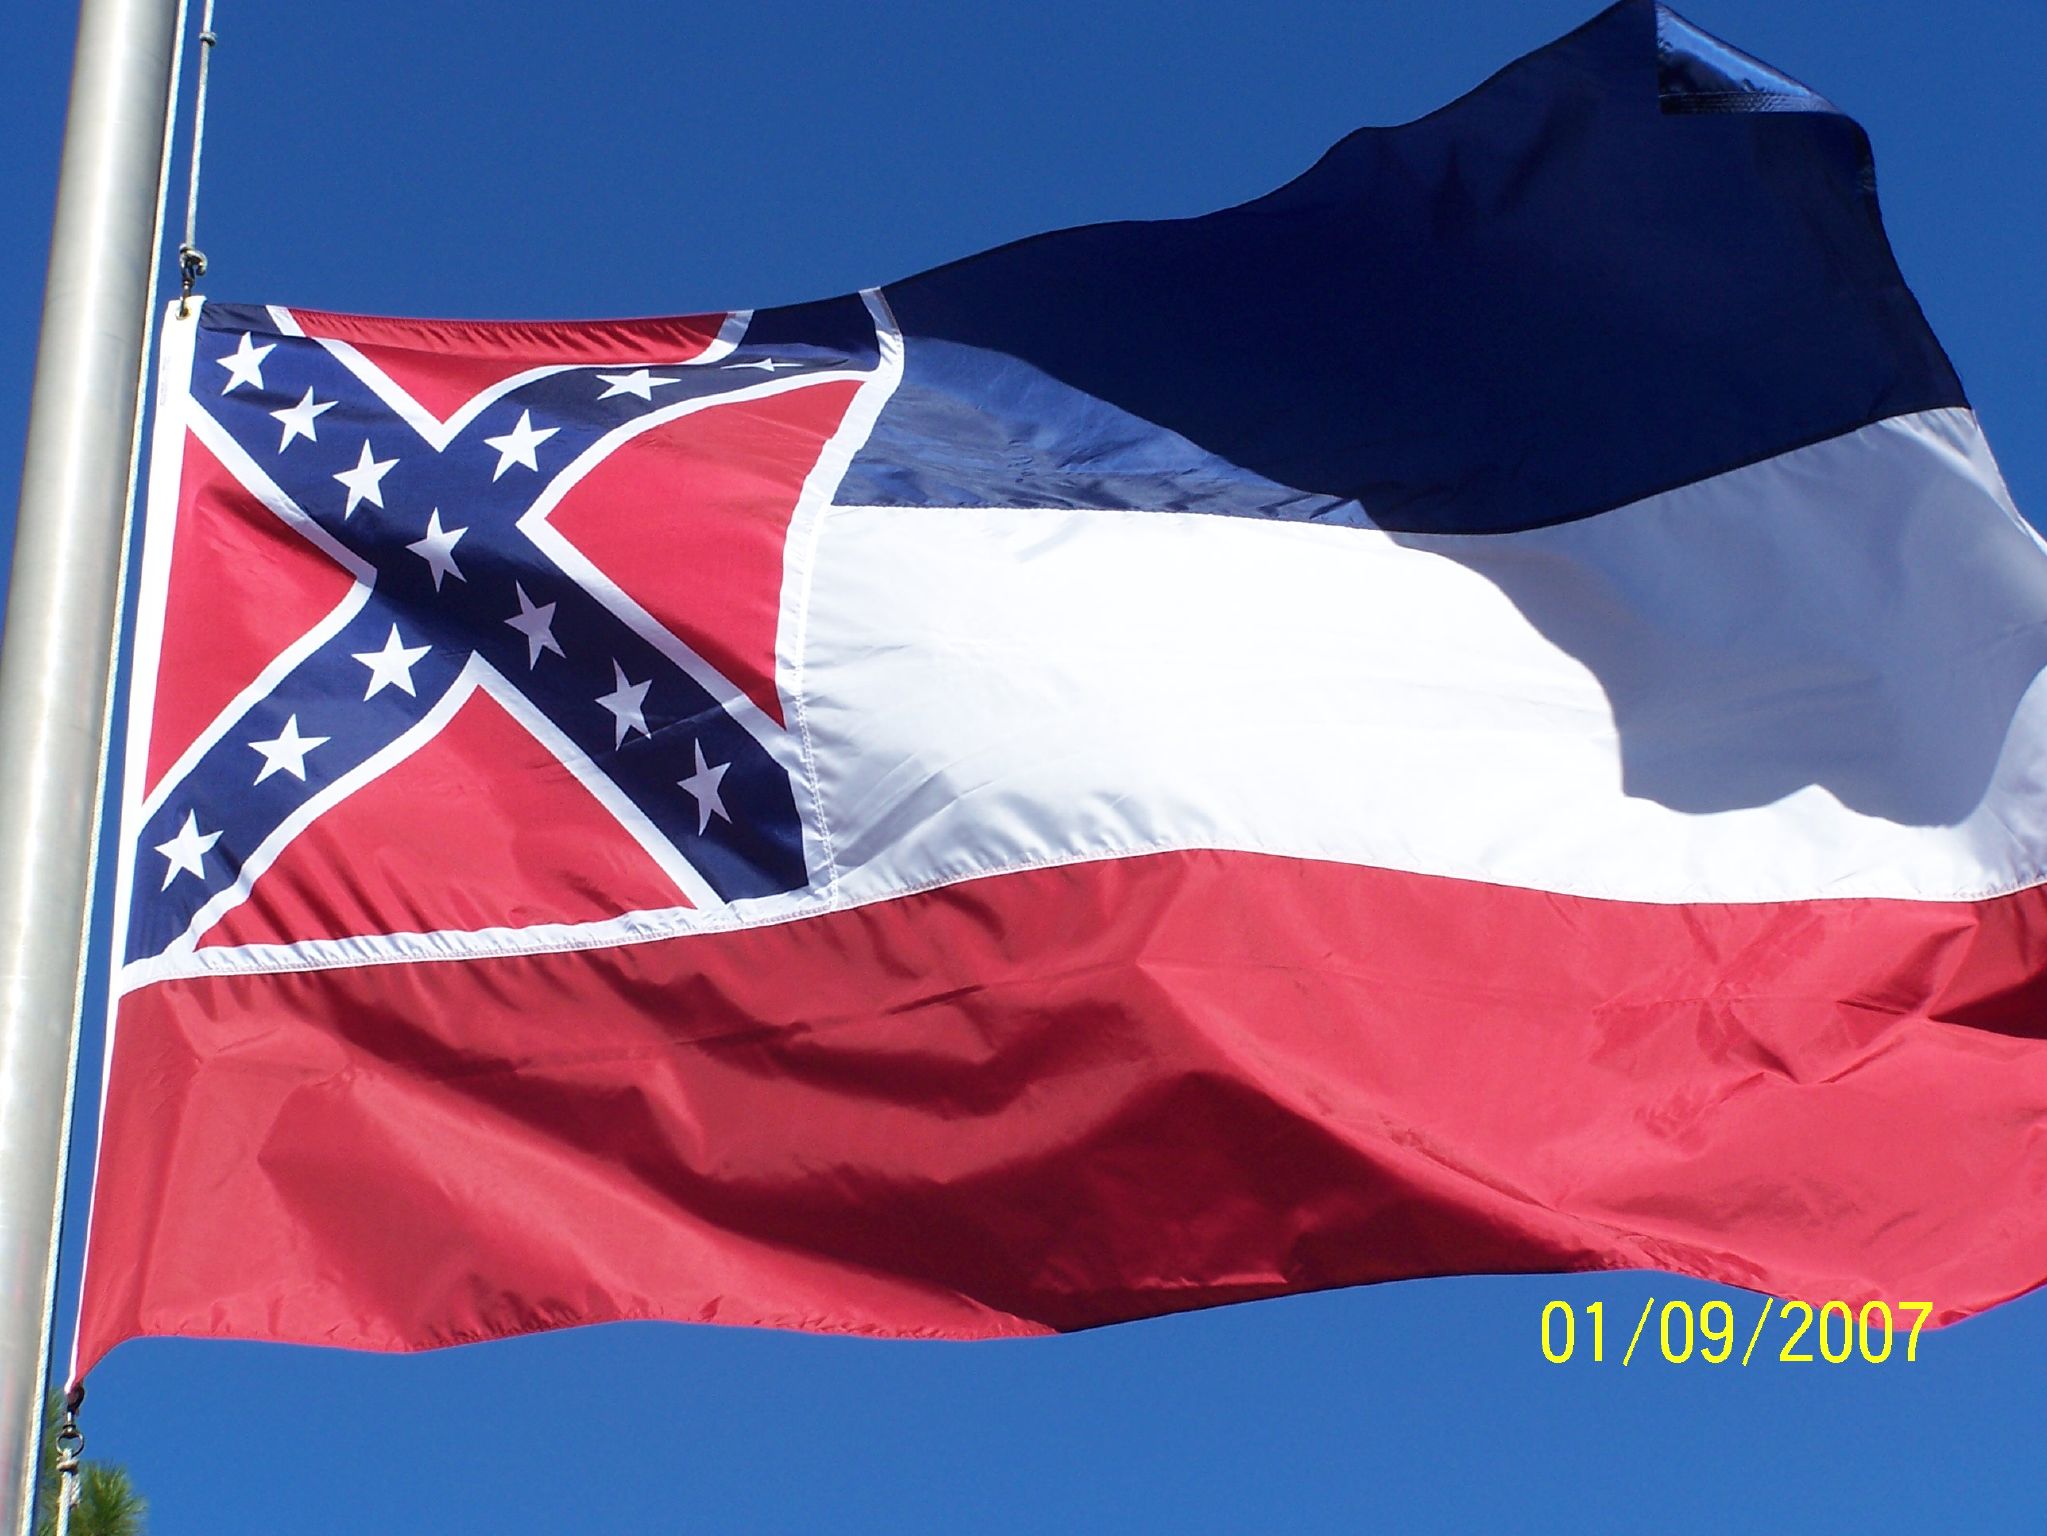 Pin Southern Pride Rebel Flag Wallpaper For Iphone App Info on